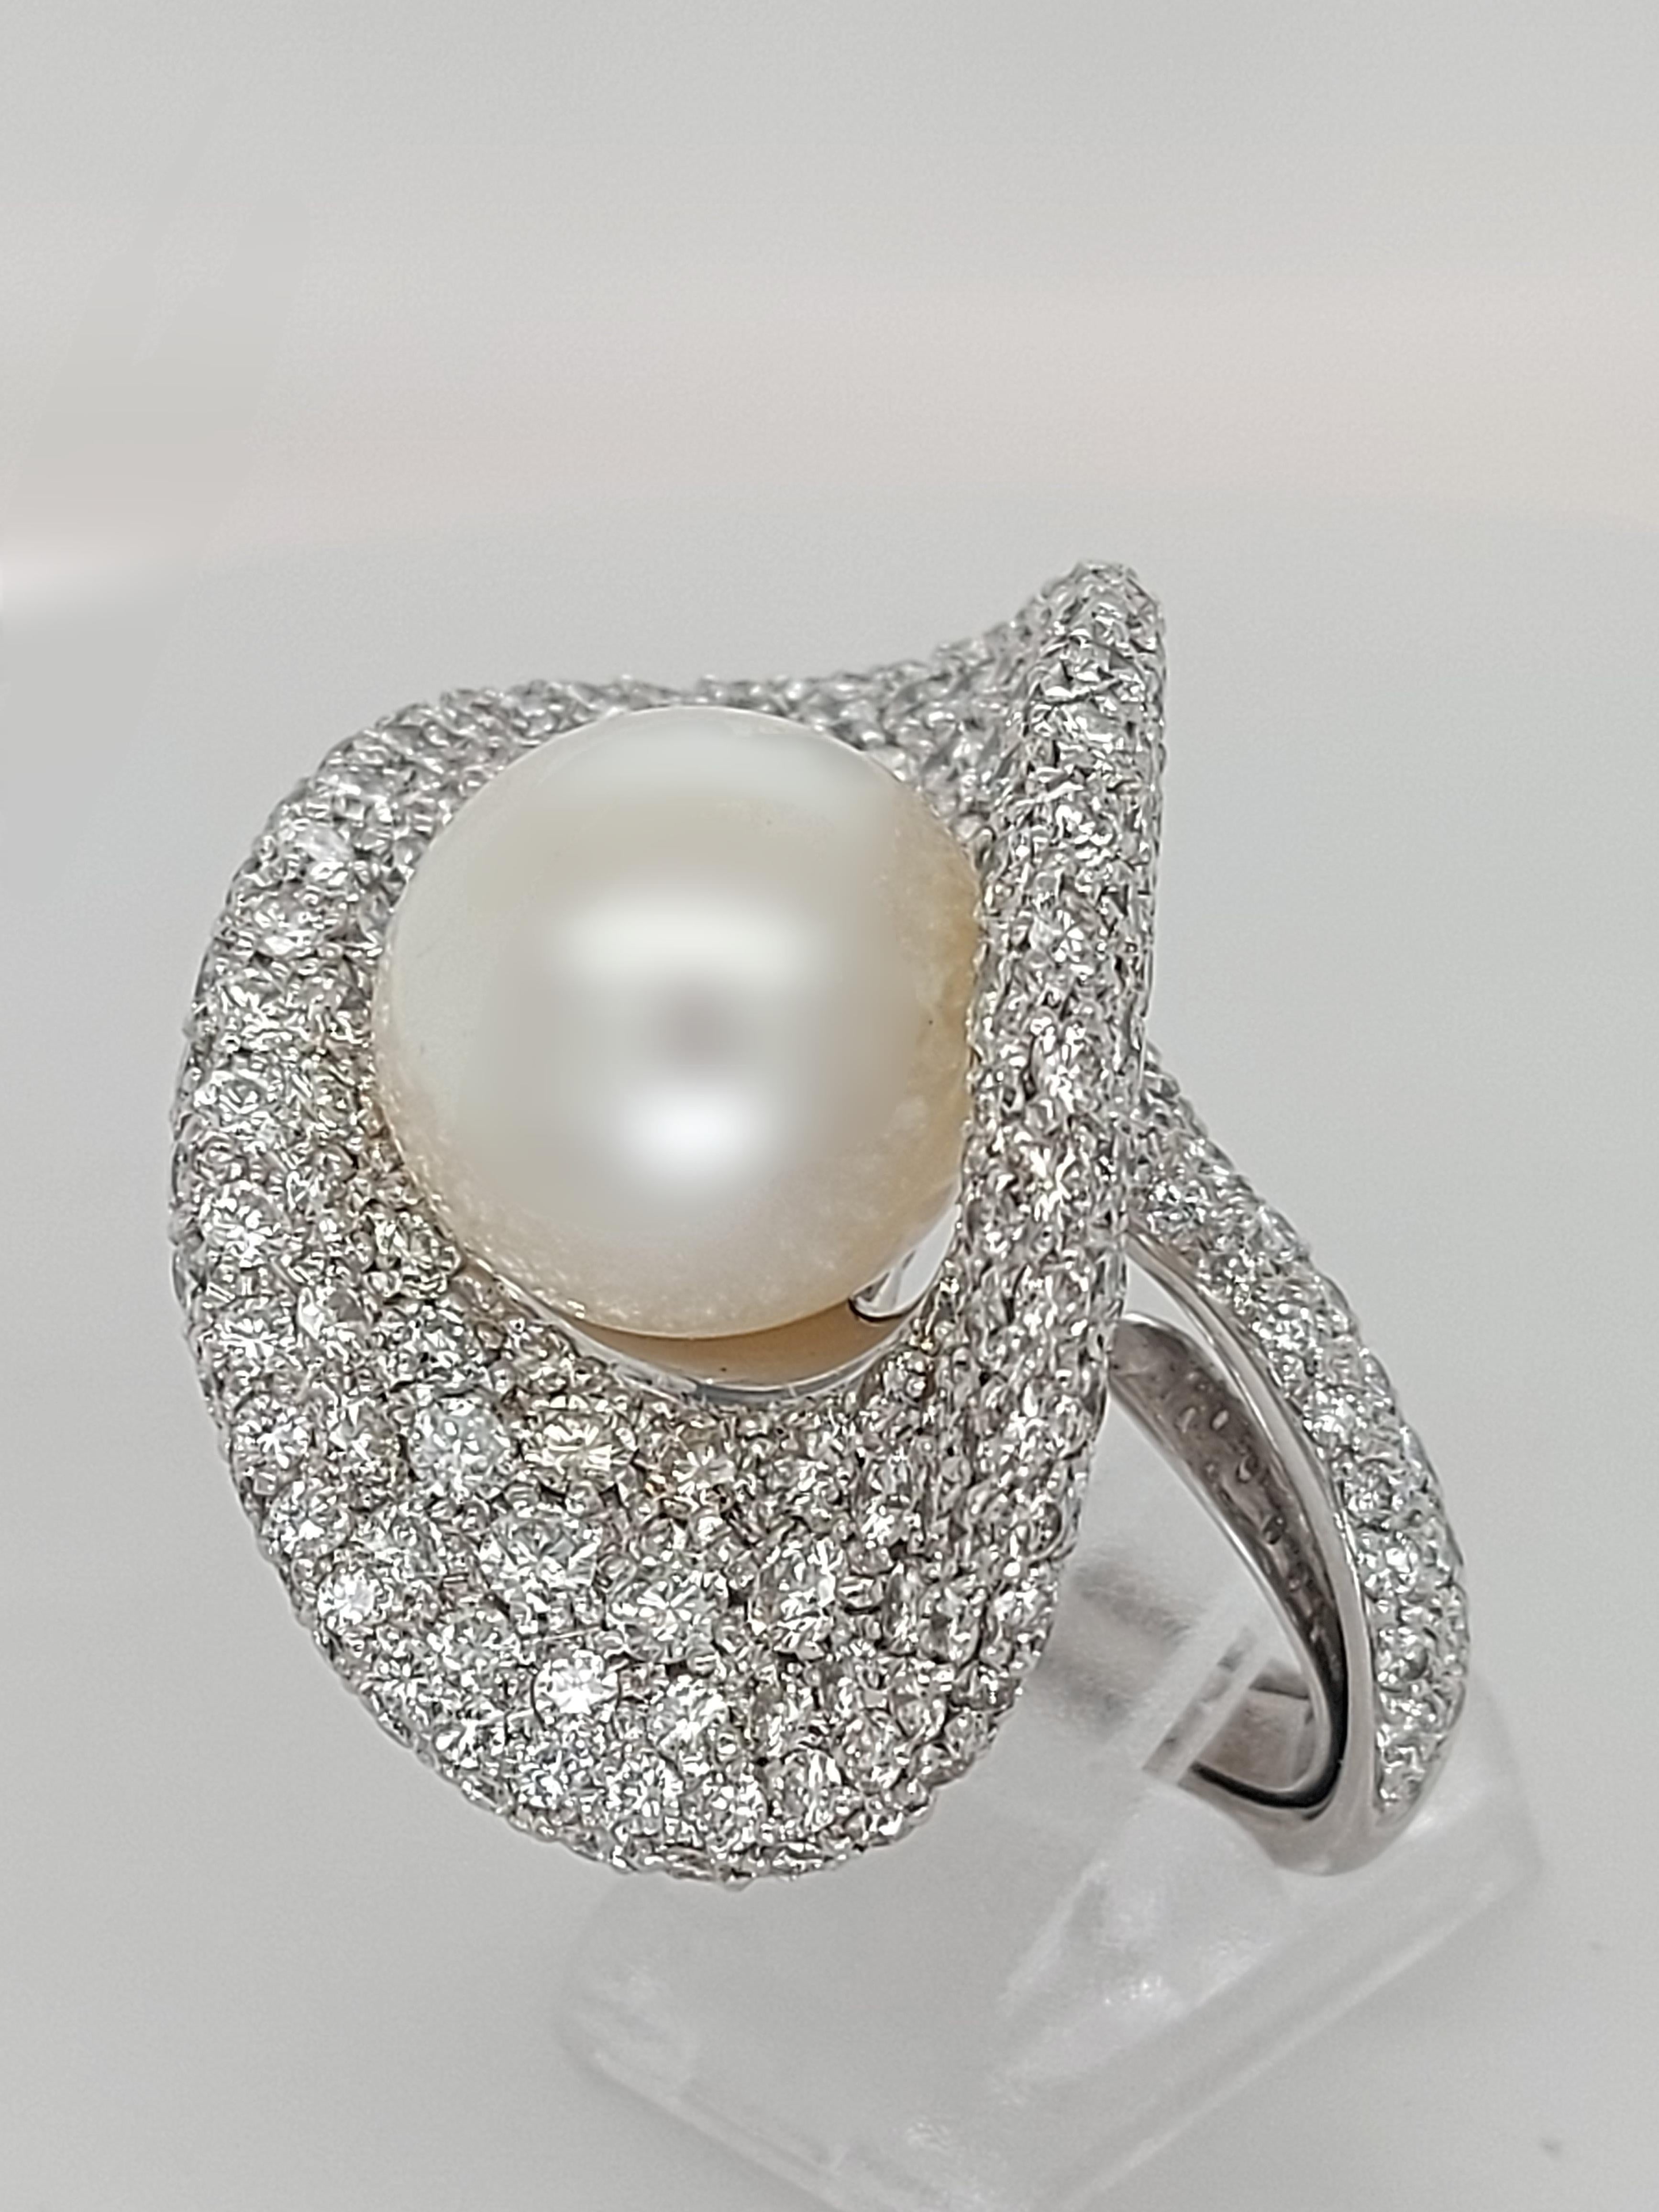 Brilliant Cut Magnificent 18 Karat White Gold Ring with 14.5 Carat Diamonds and a Big Pearl For Sale